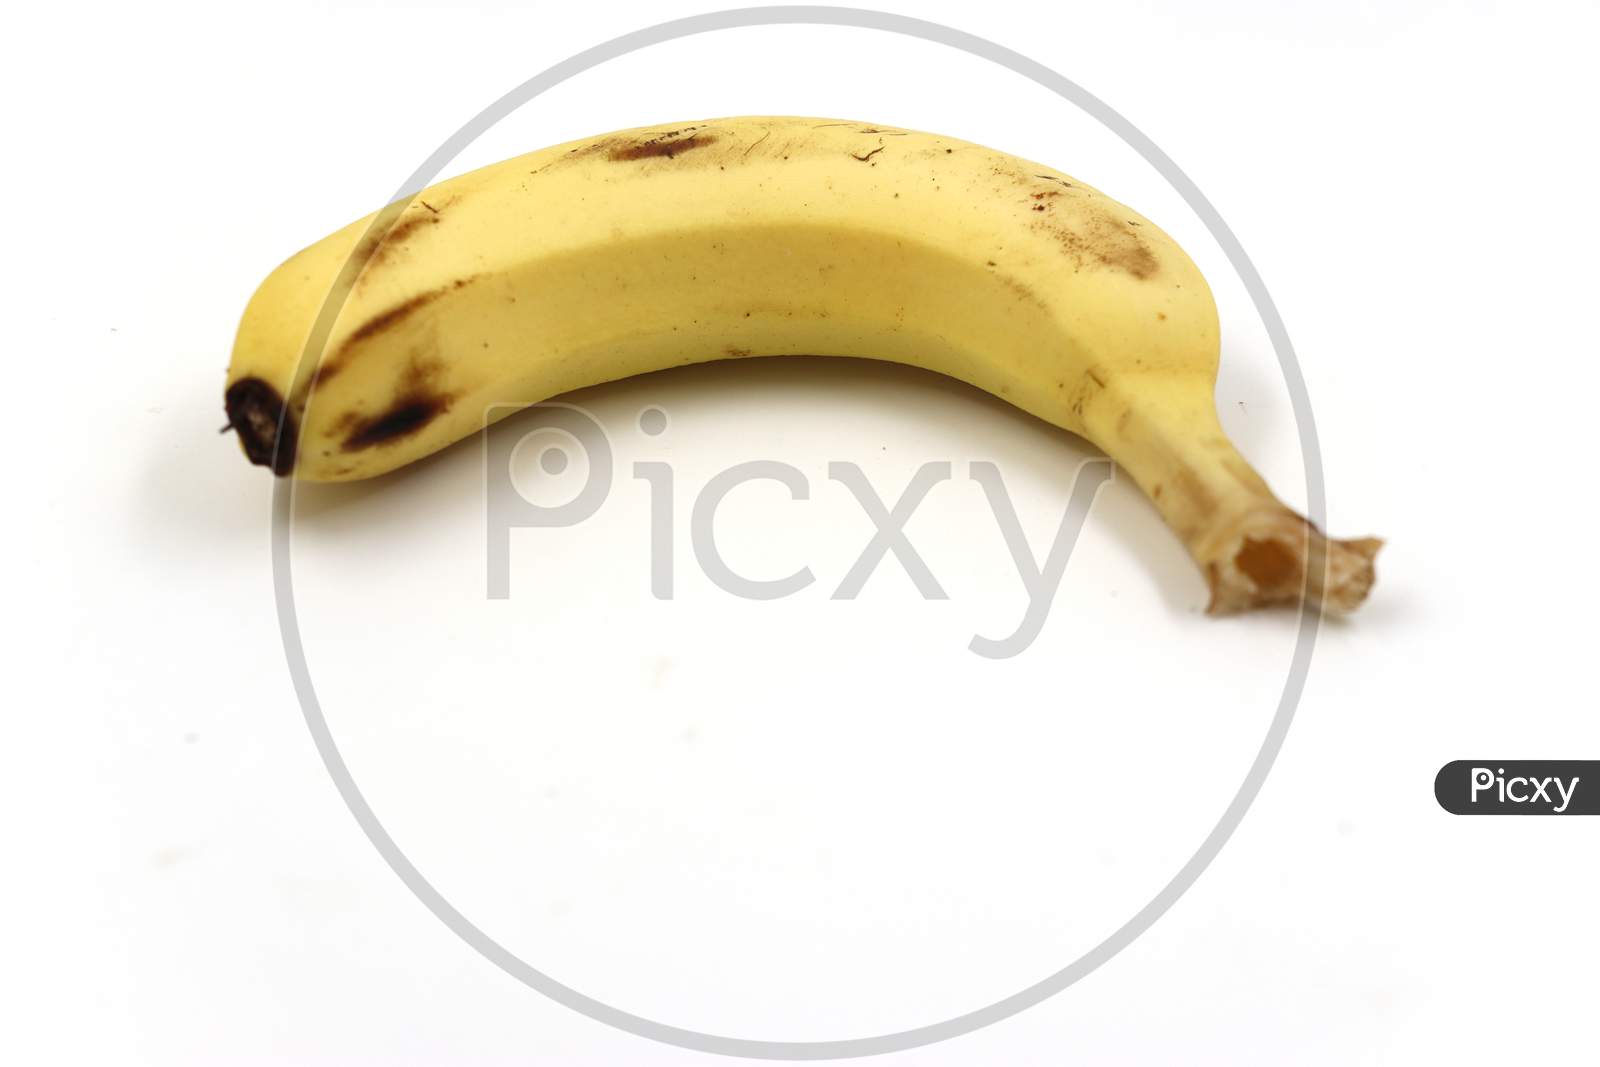 side view one banana isolate on white background